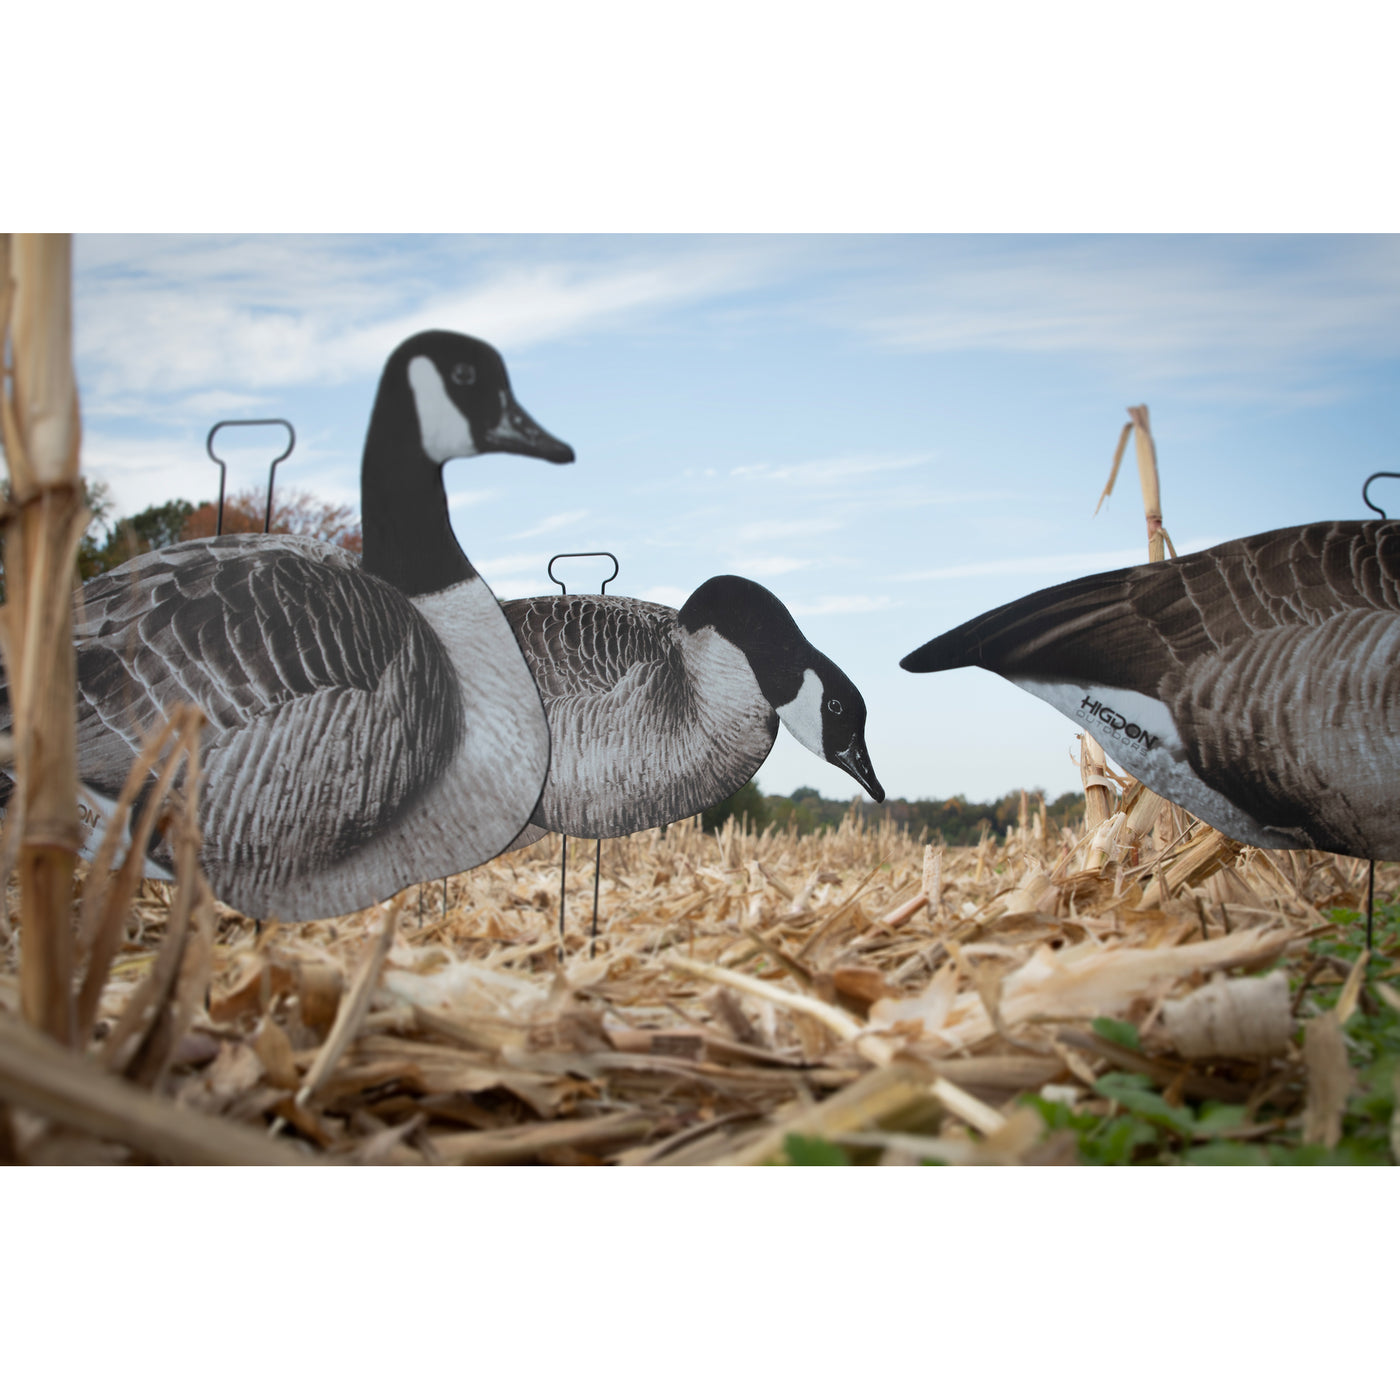 Higdon FLATS Magnum Specklebelly Goose Motion Silhouette Decoys - 12 Pack